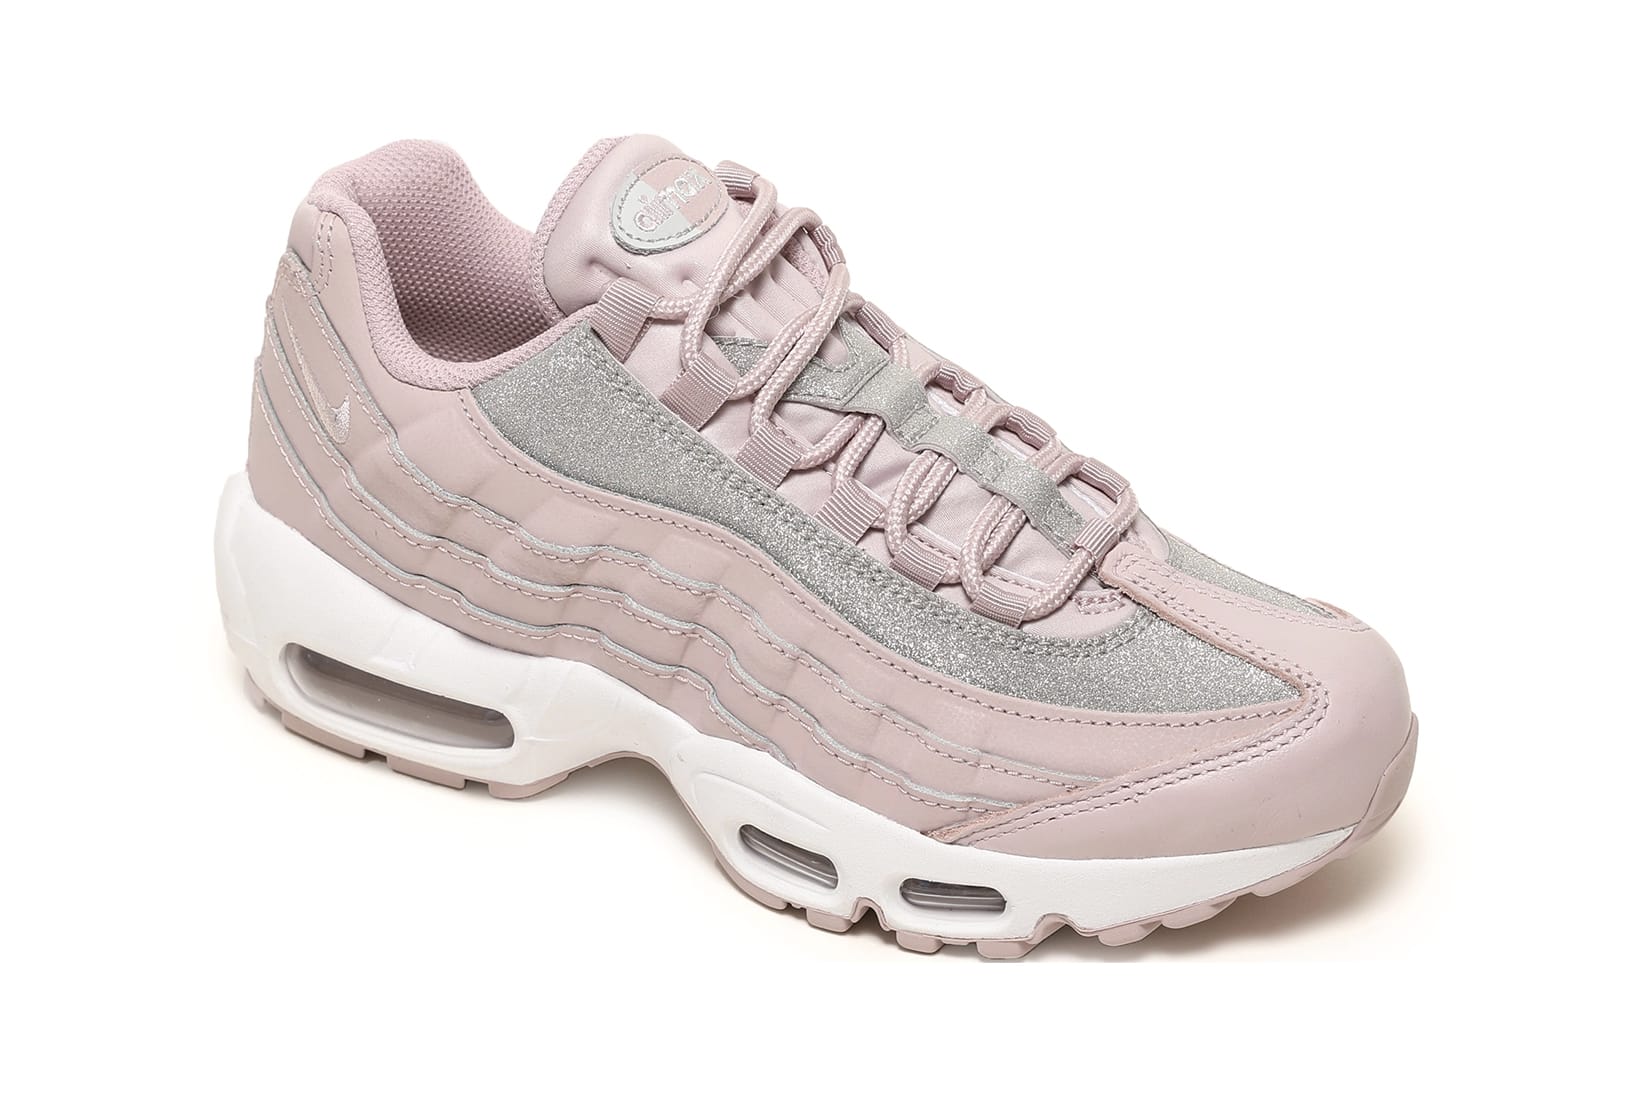 Nike Air Max 95 SE in  ديري ميلك اوريو